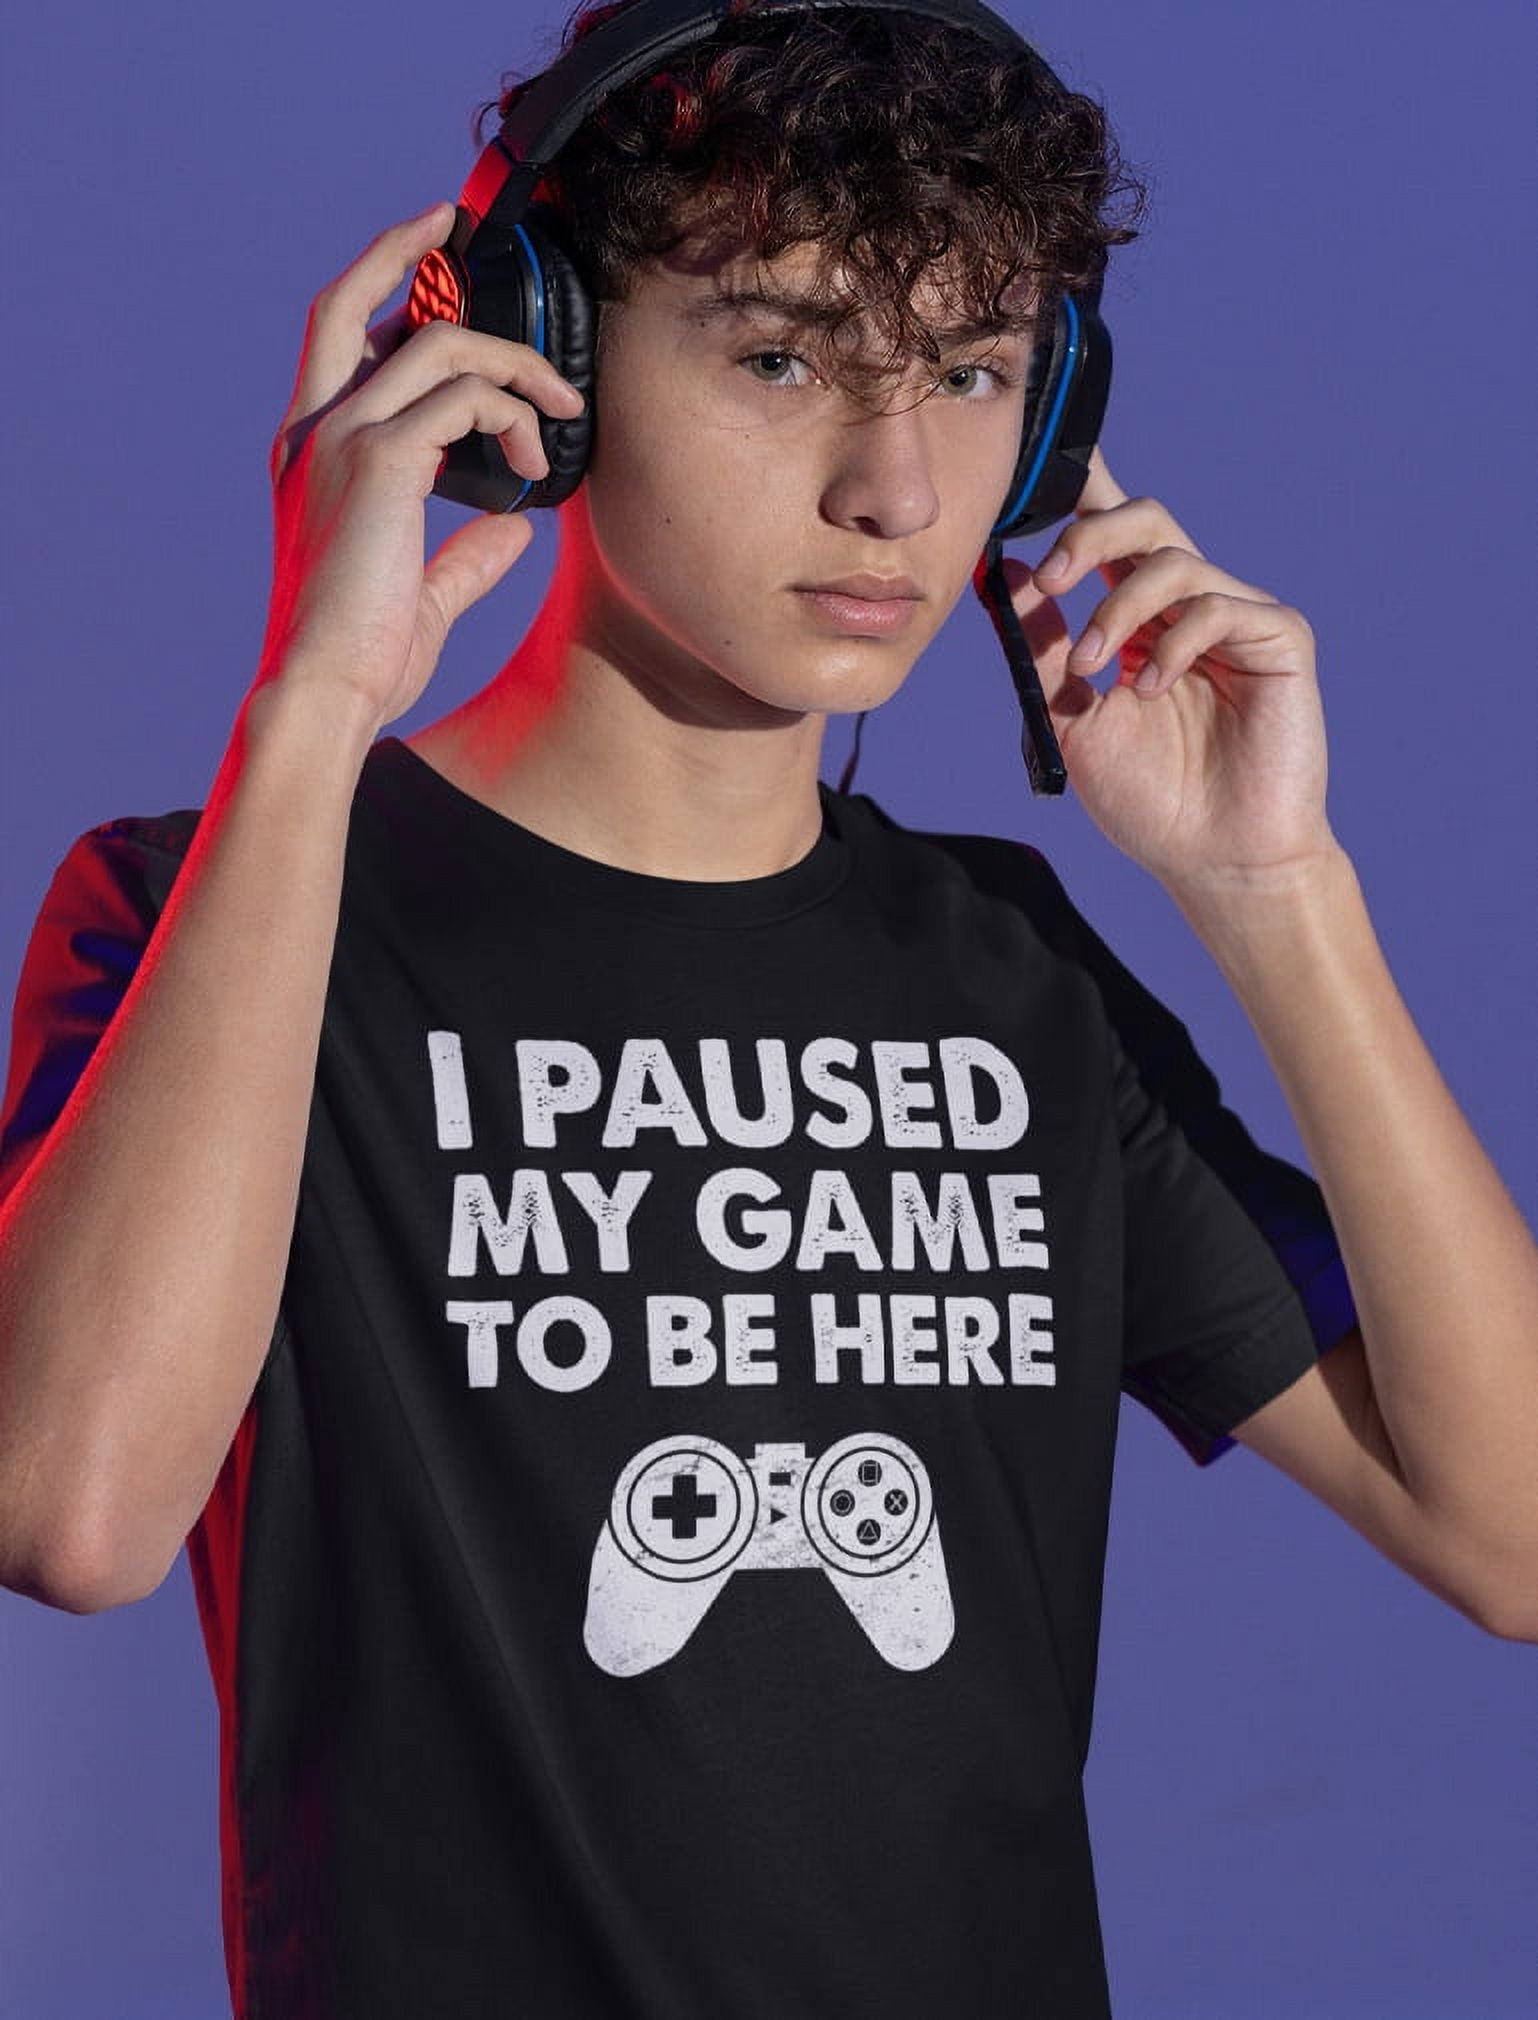 Here for for for Be Design Tee Girls Boys Gift - Game Gaming Gamer & To I Unique Themed My Shirt Video Game - Paused Enthusiasts - Kids Unisex